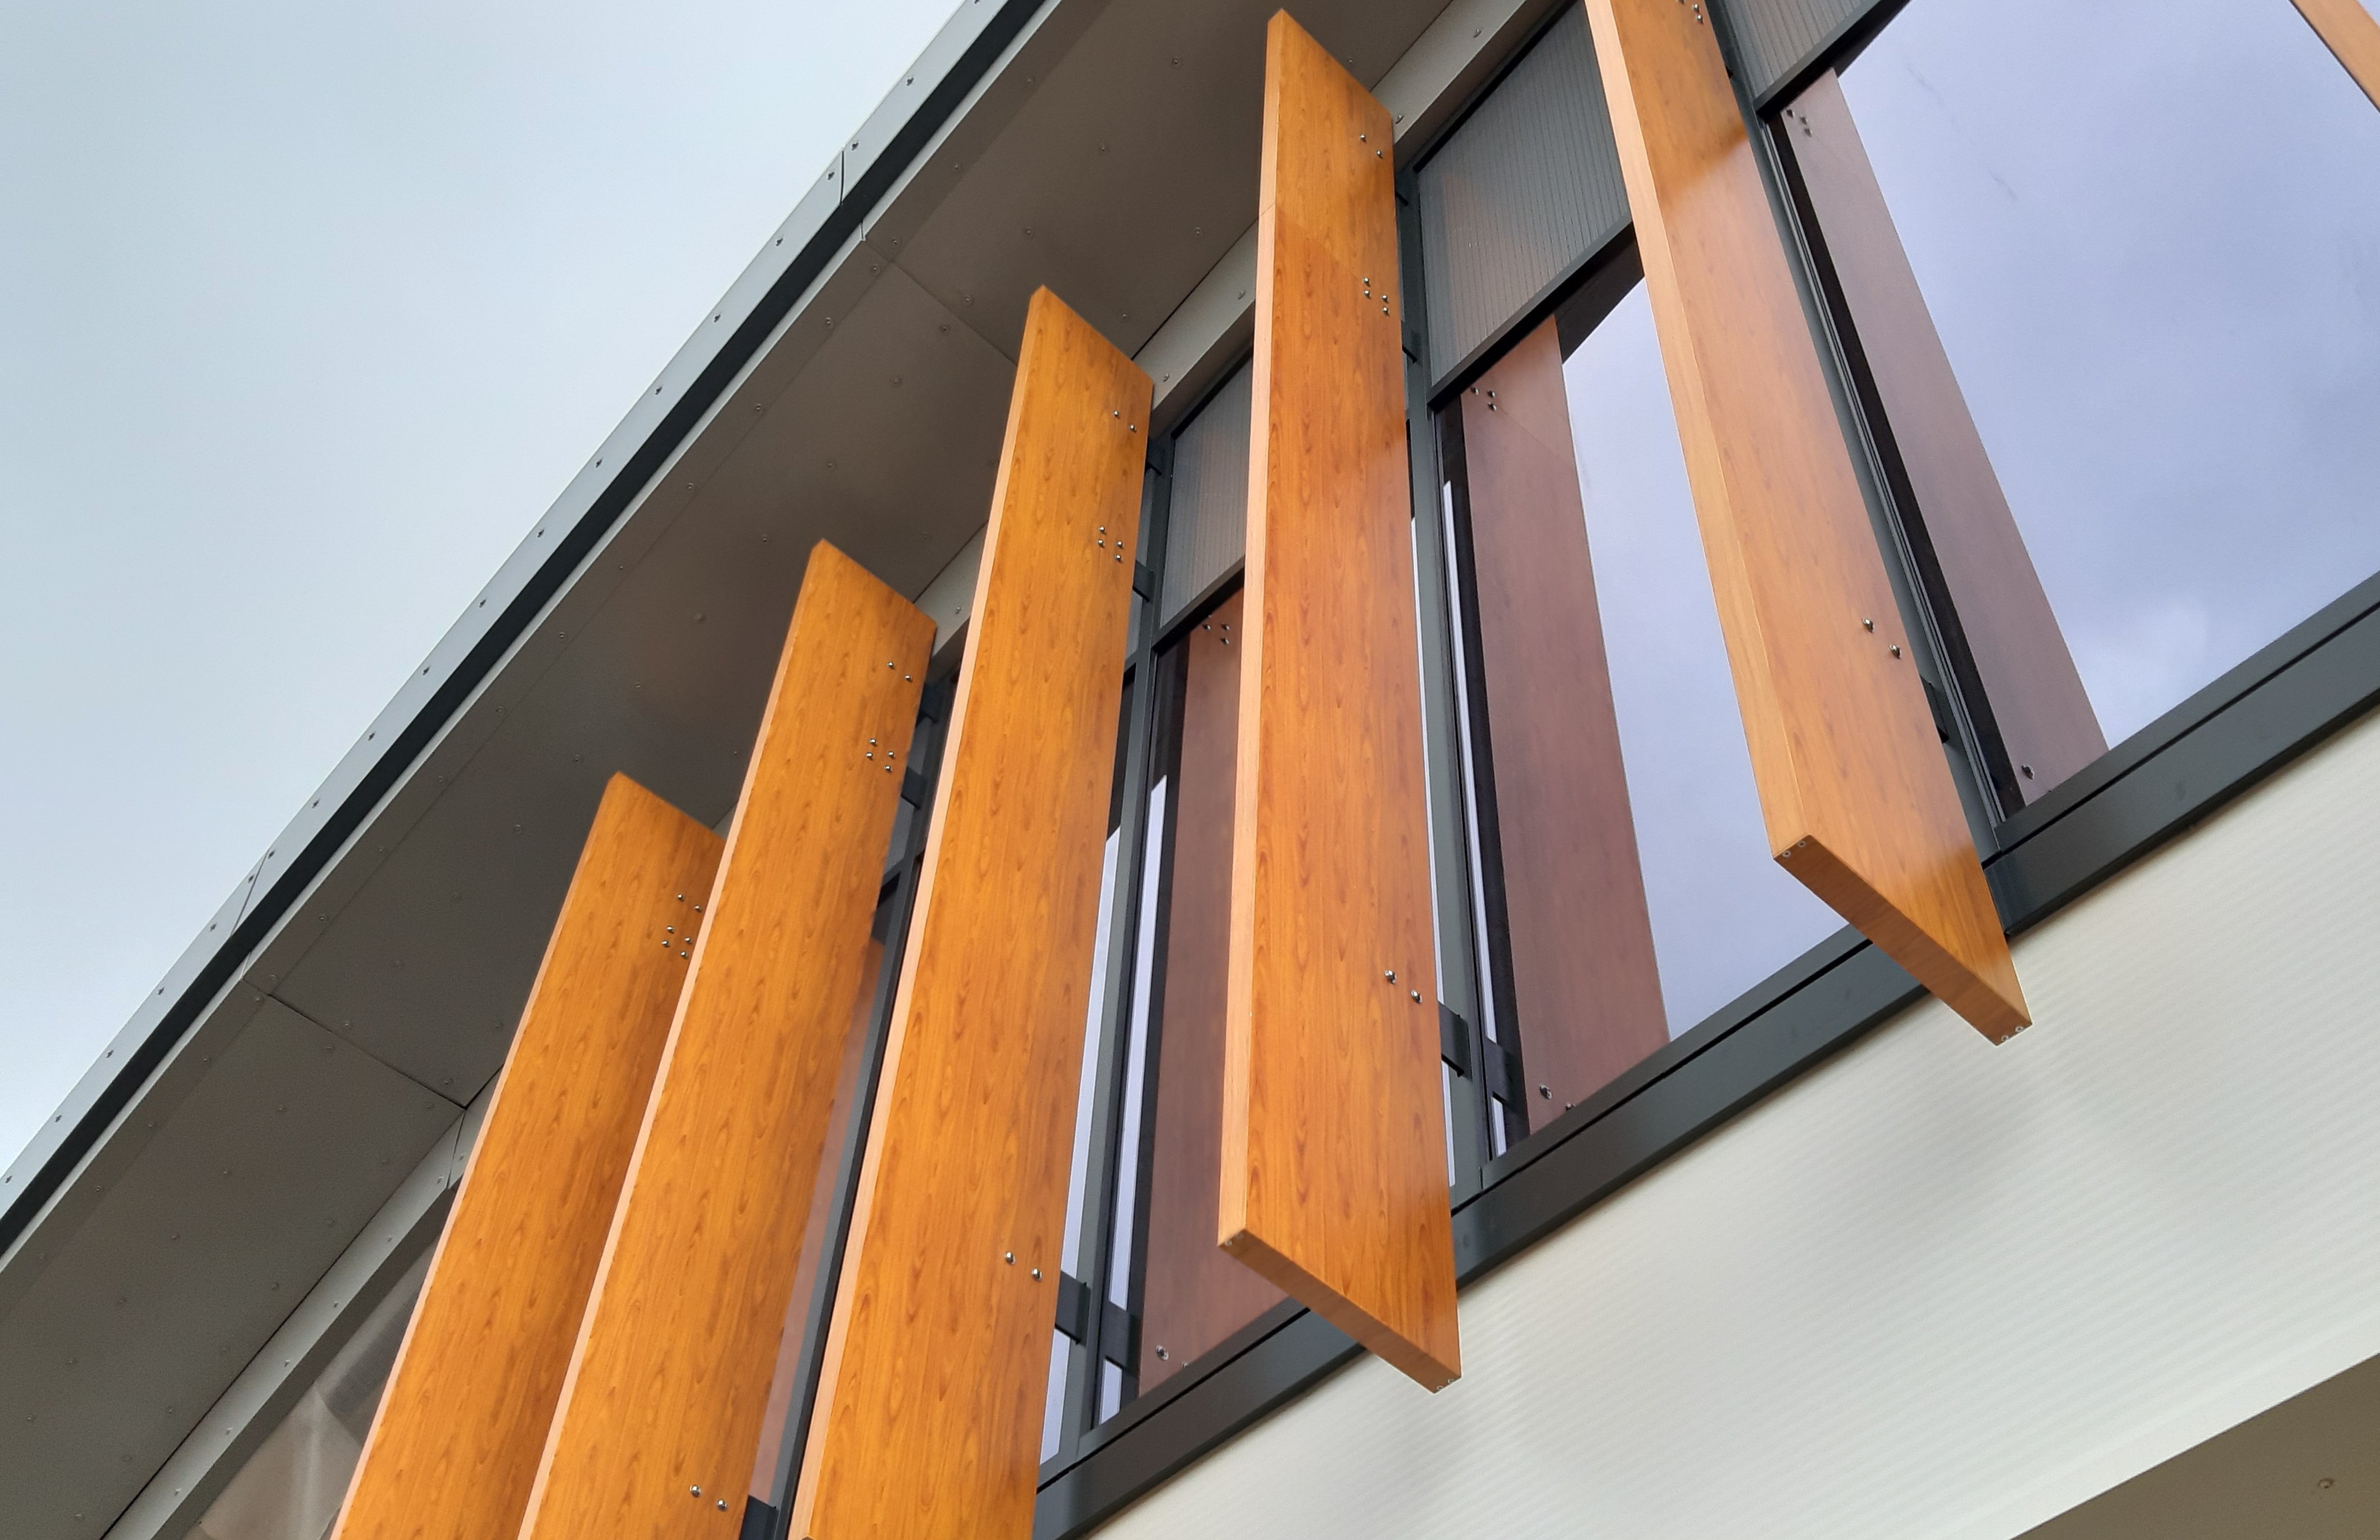 Maple uses thermal-break brackets to install brise soleil on Maidenhead leisure centre